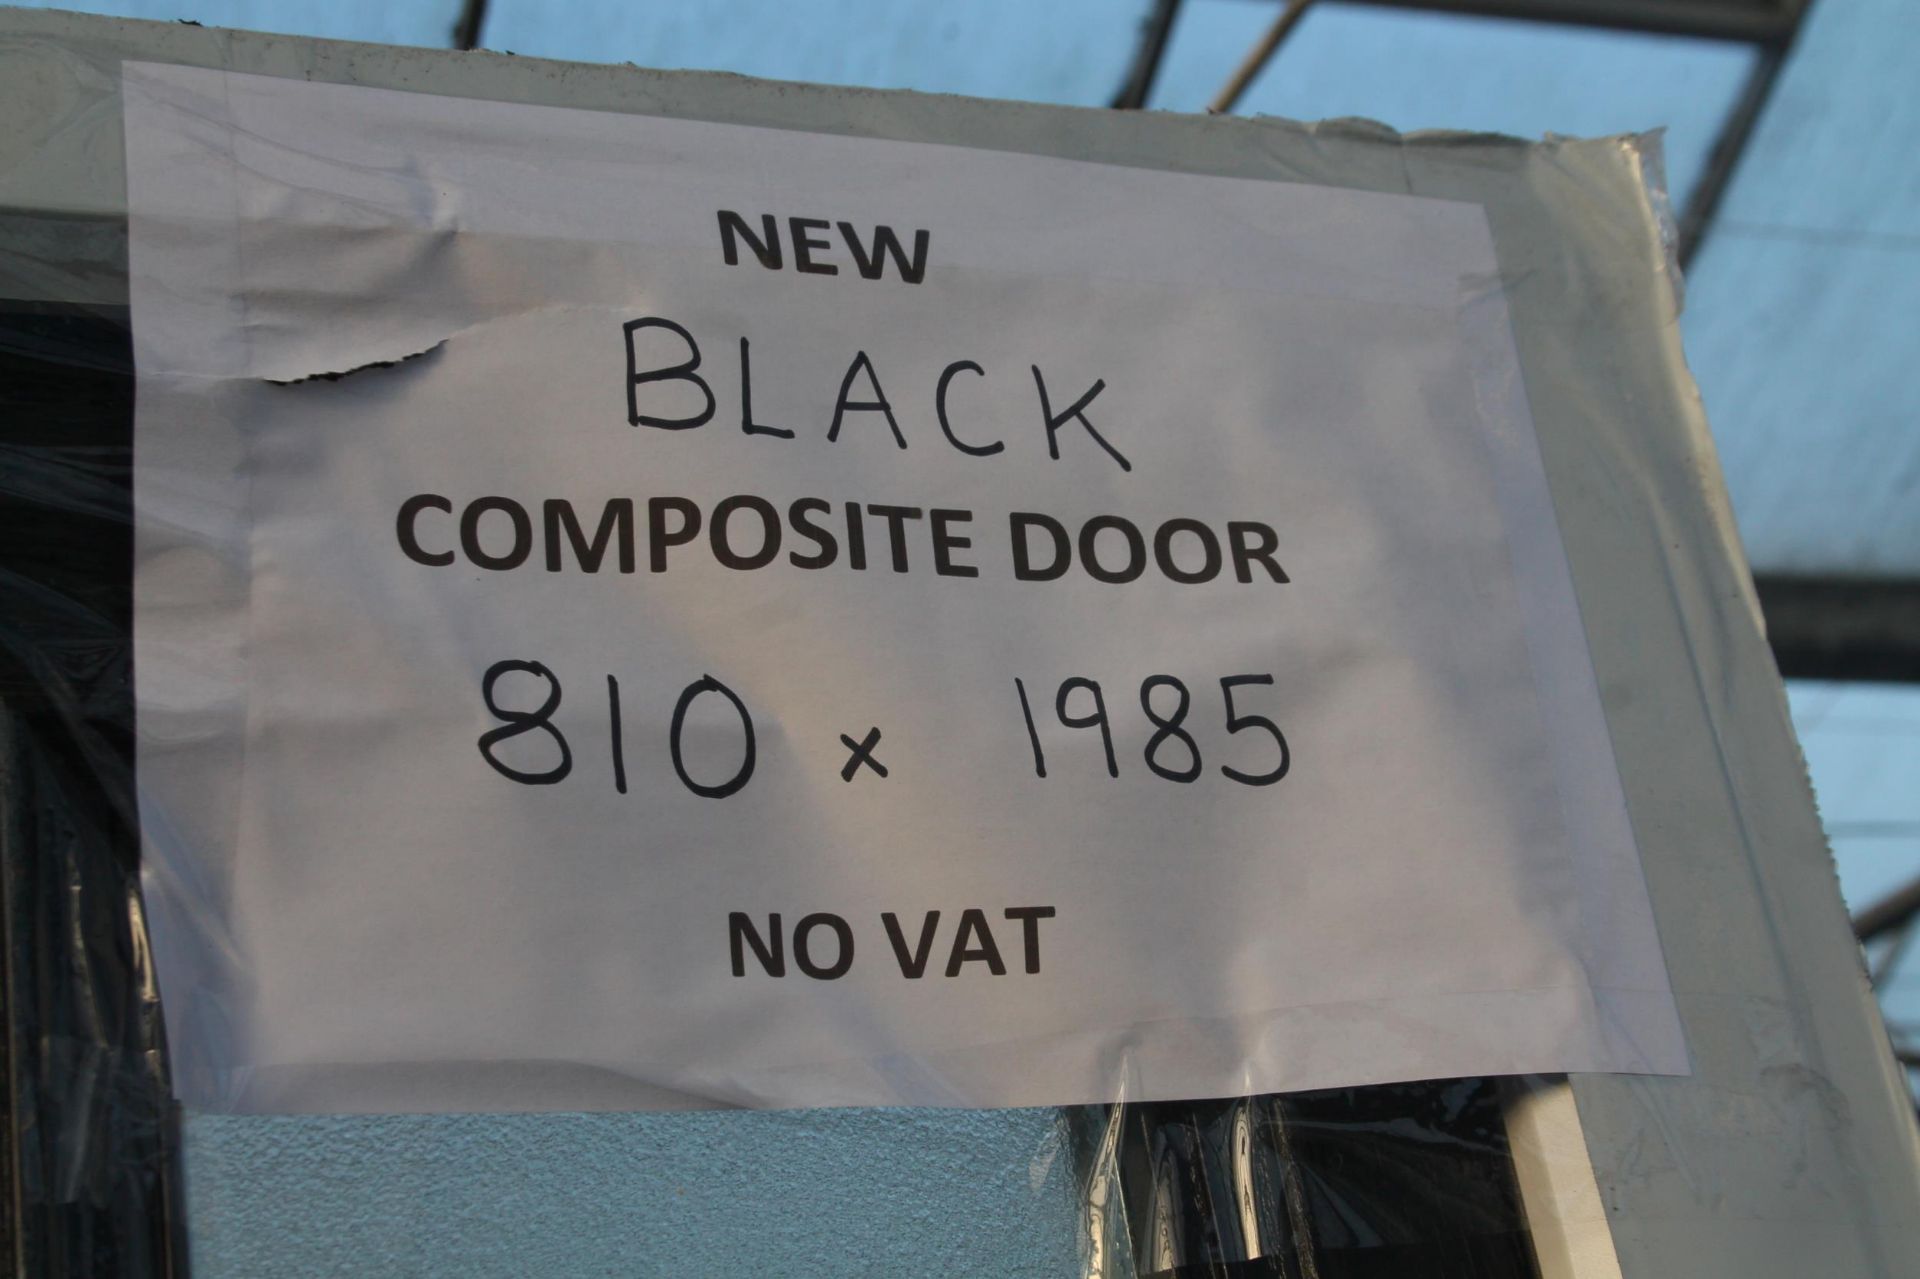 A NEW BLACK COMPOSITE DOOR AND FRAME 810MM X 1985MM LOCK AND KEYS IN LETTERBOX NO VAT - Bild 2 aus 3